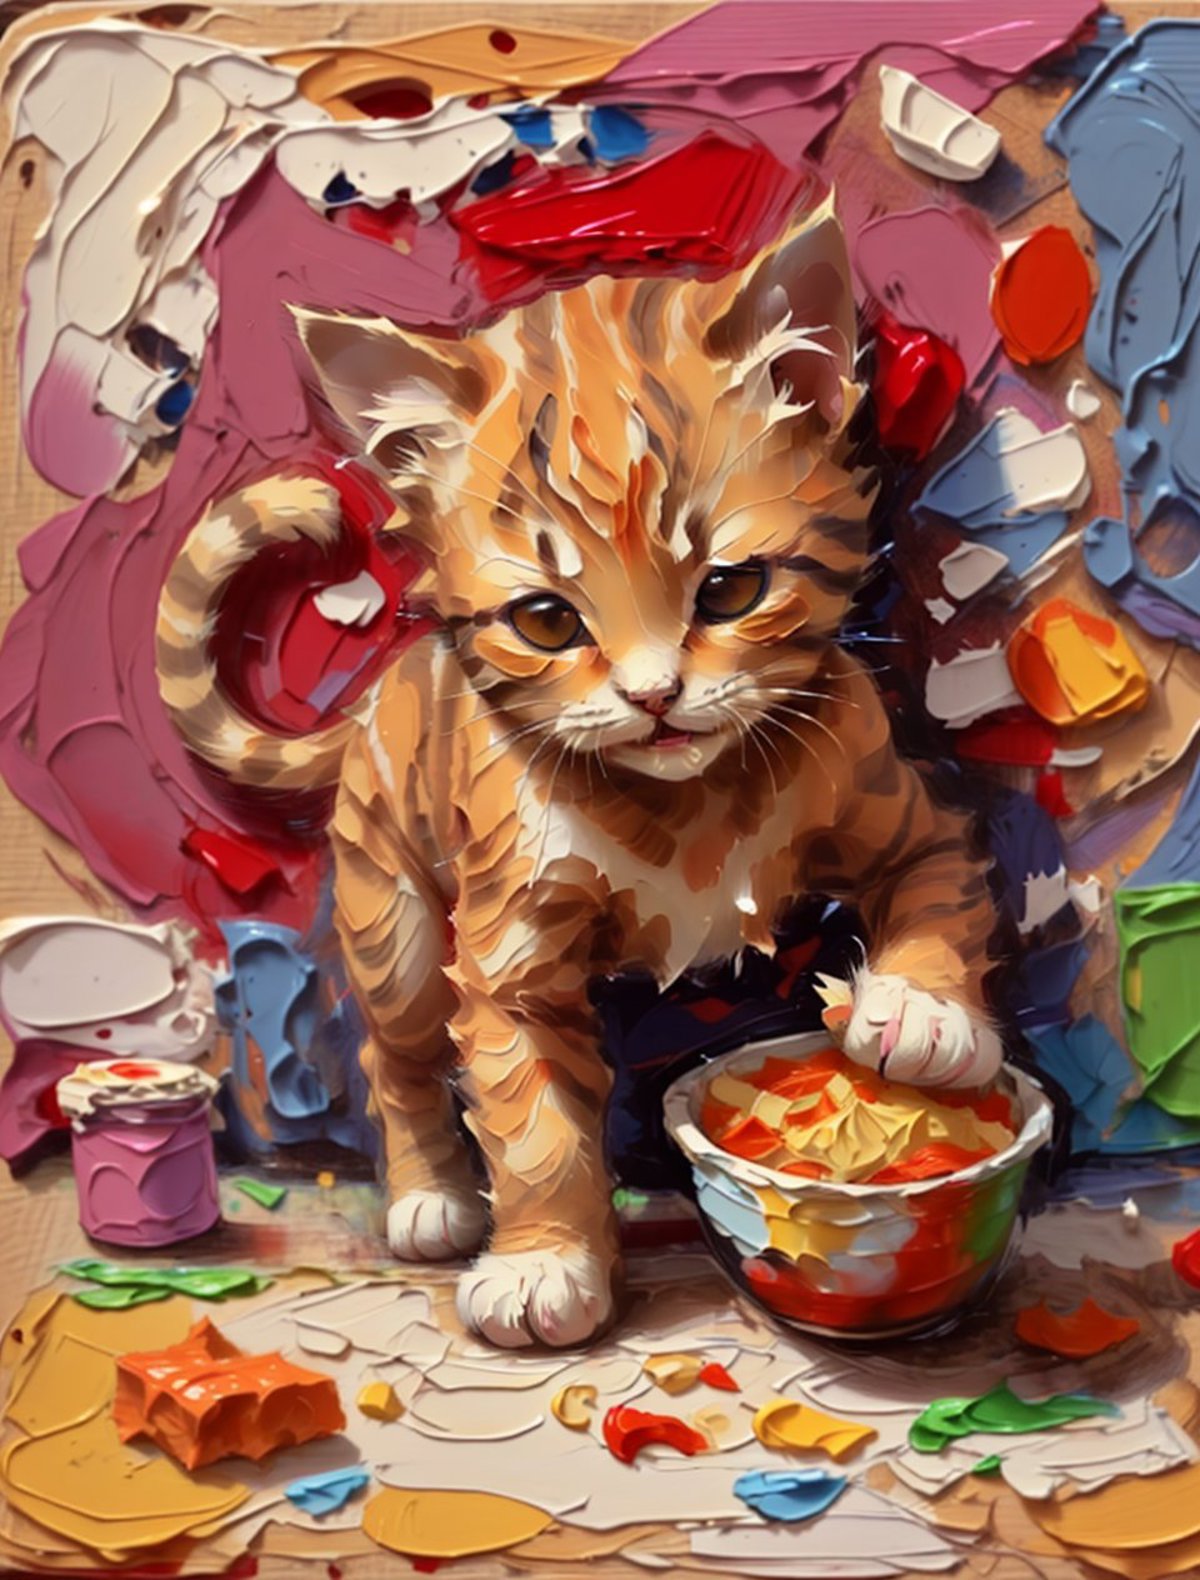 Orange and White Kitten Playing with a Bowl of Food.